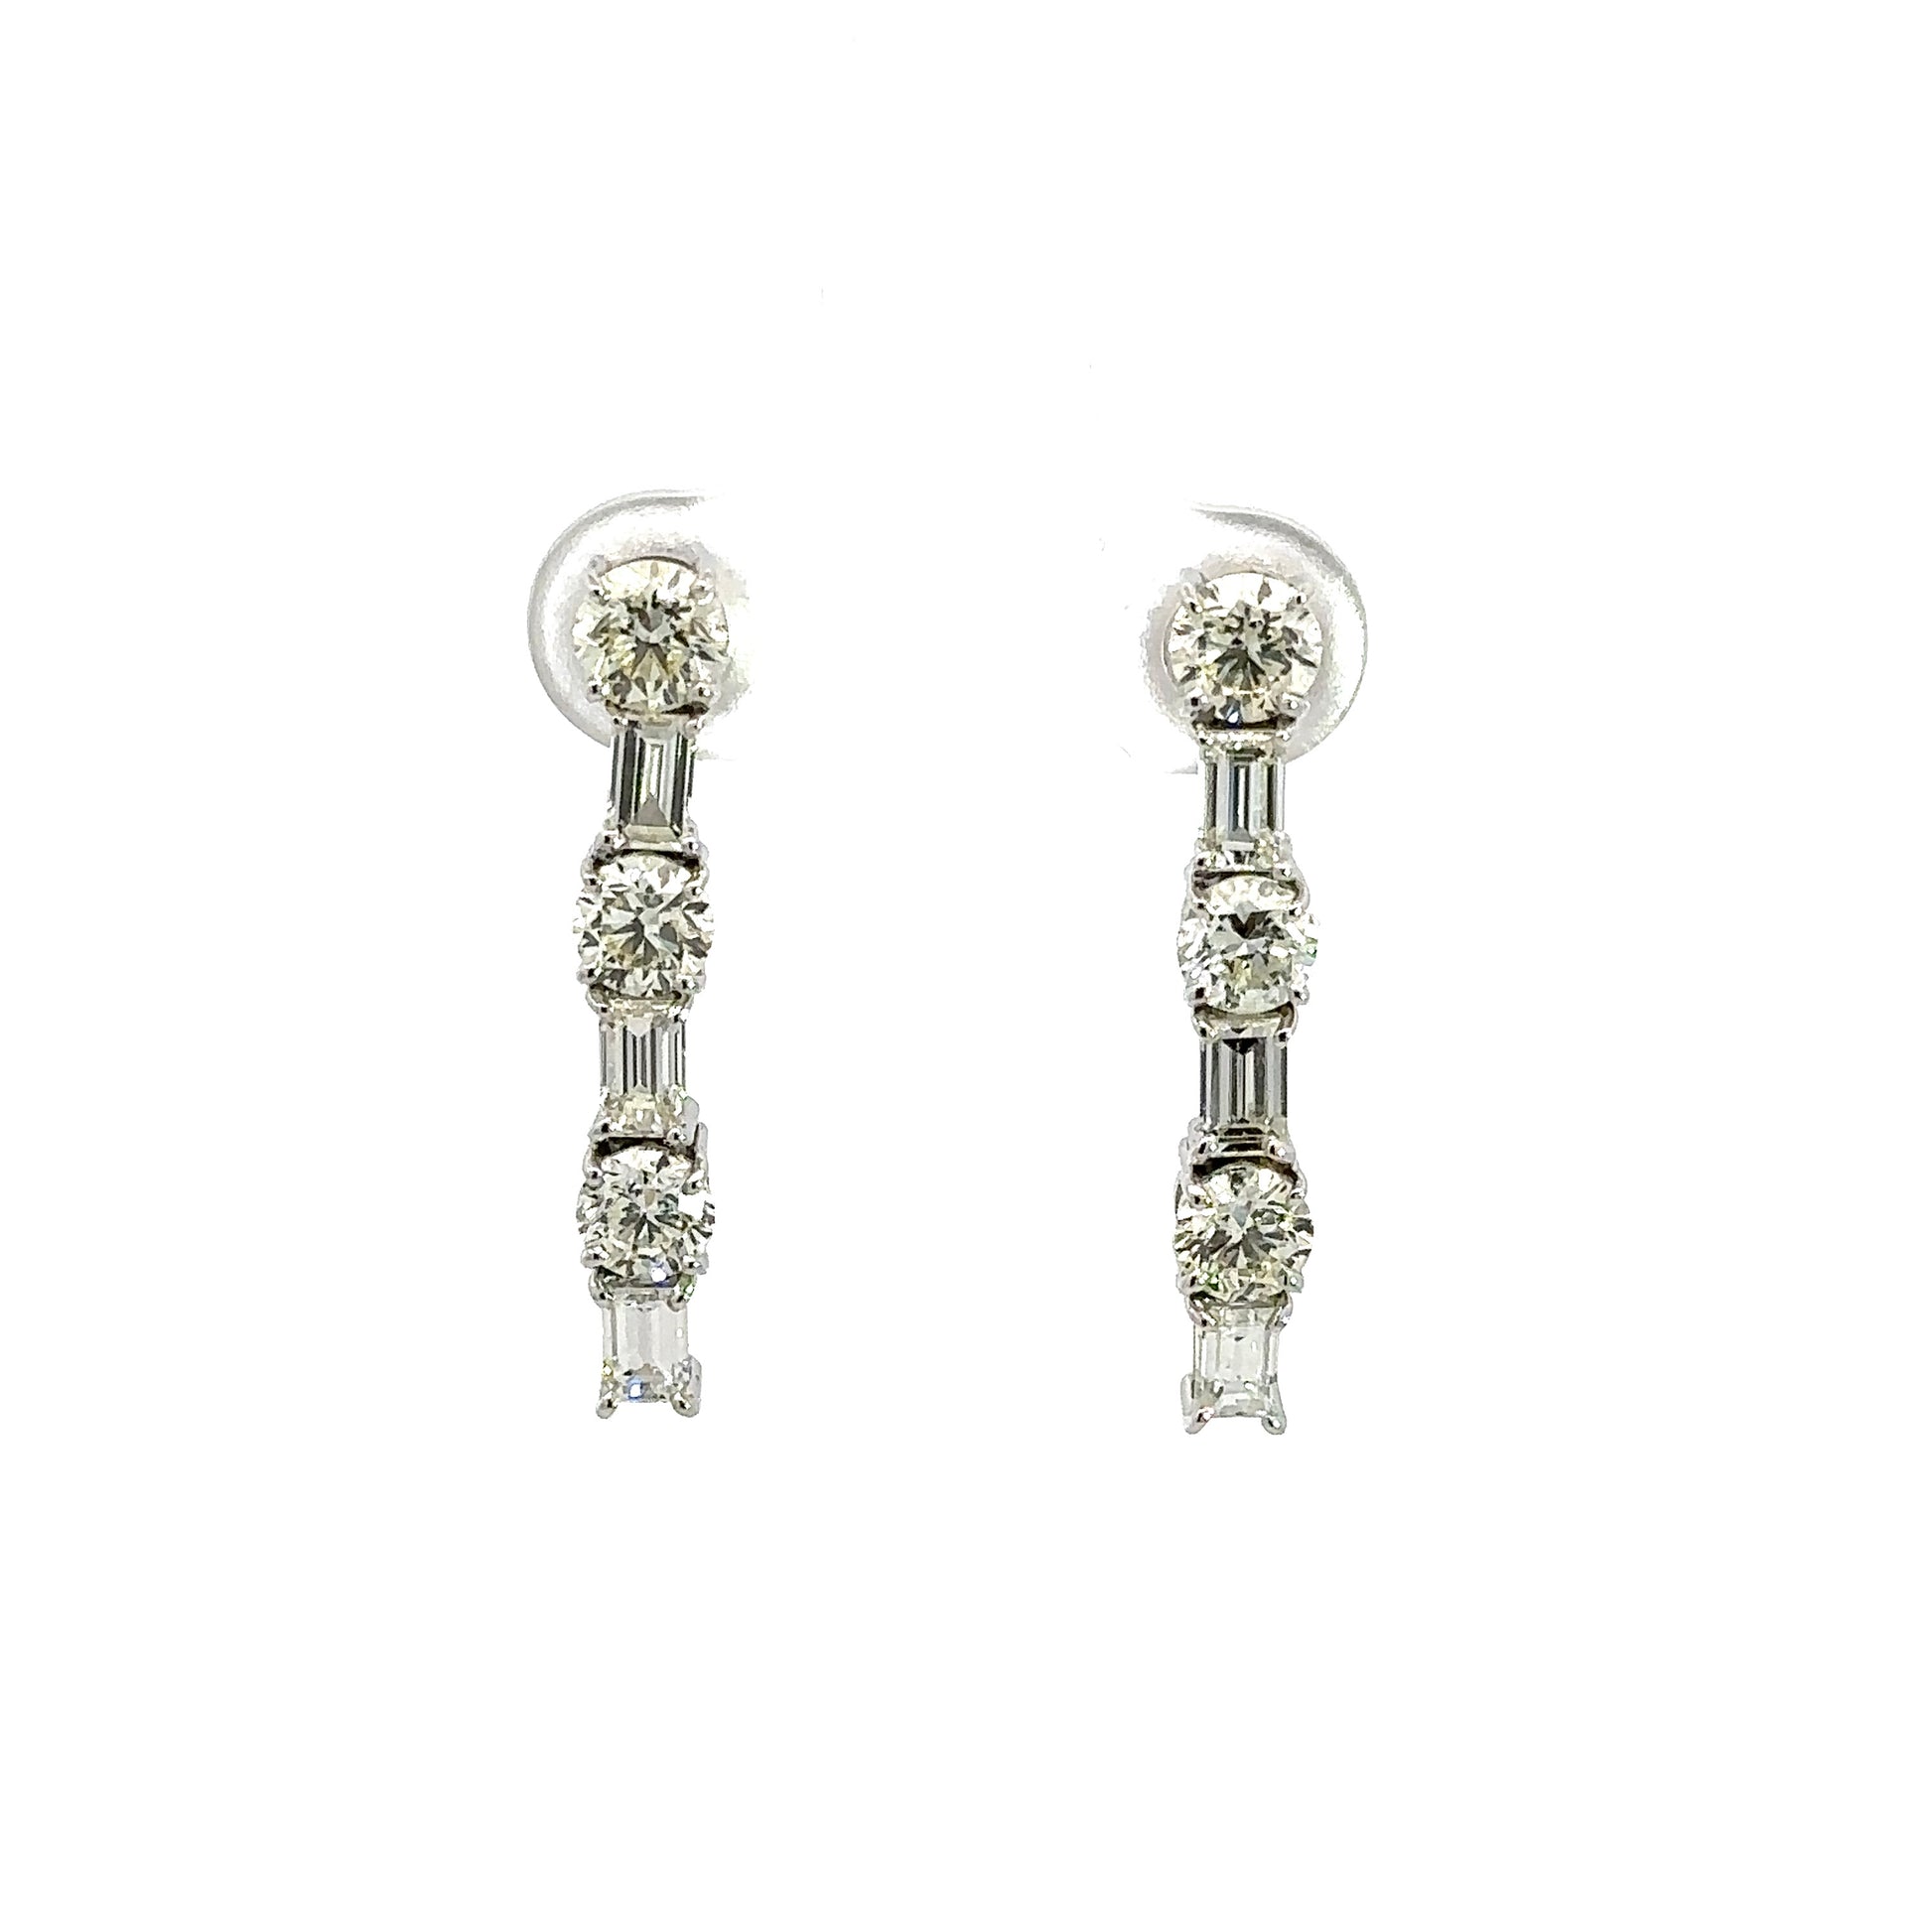 Front of white gold diamond drop errings with 3 round diamonds alternating with 3 emerald-cut diamonds on each earring.